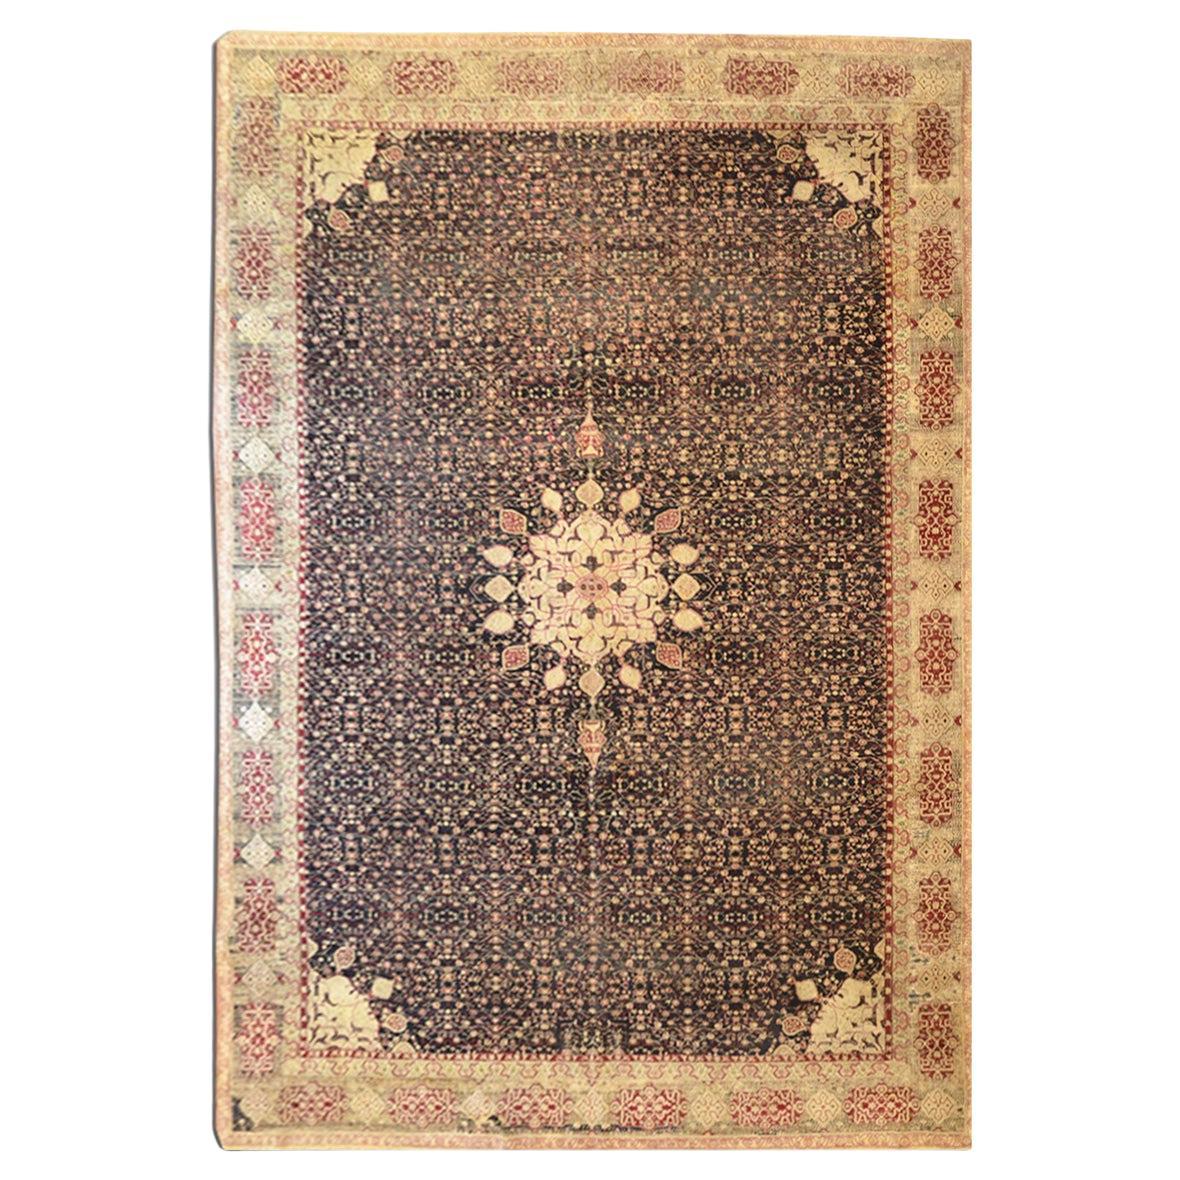  Wool Handmade Antique Indian Agra Rug with Medallion Design